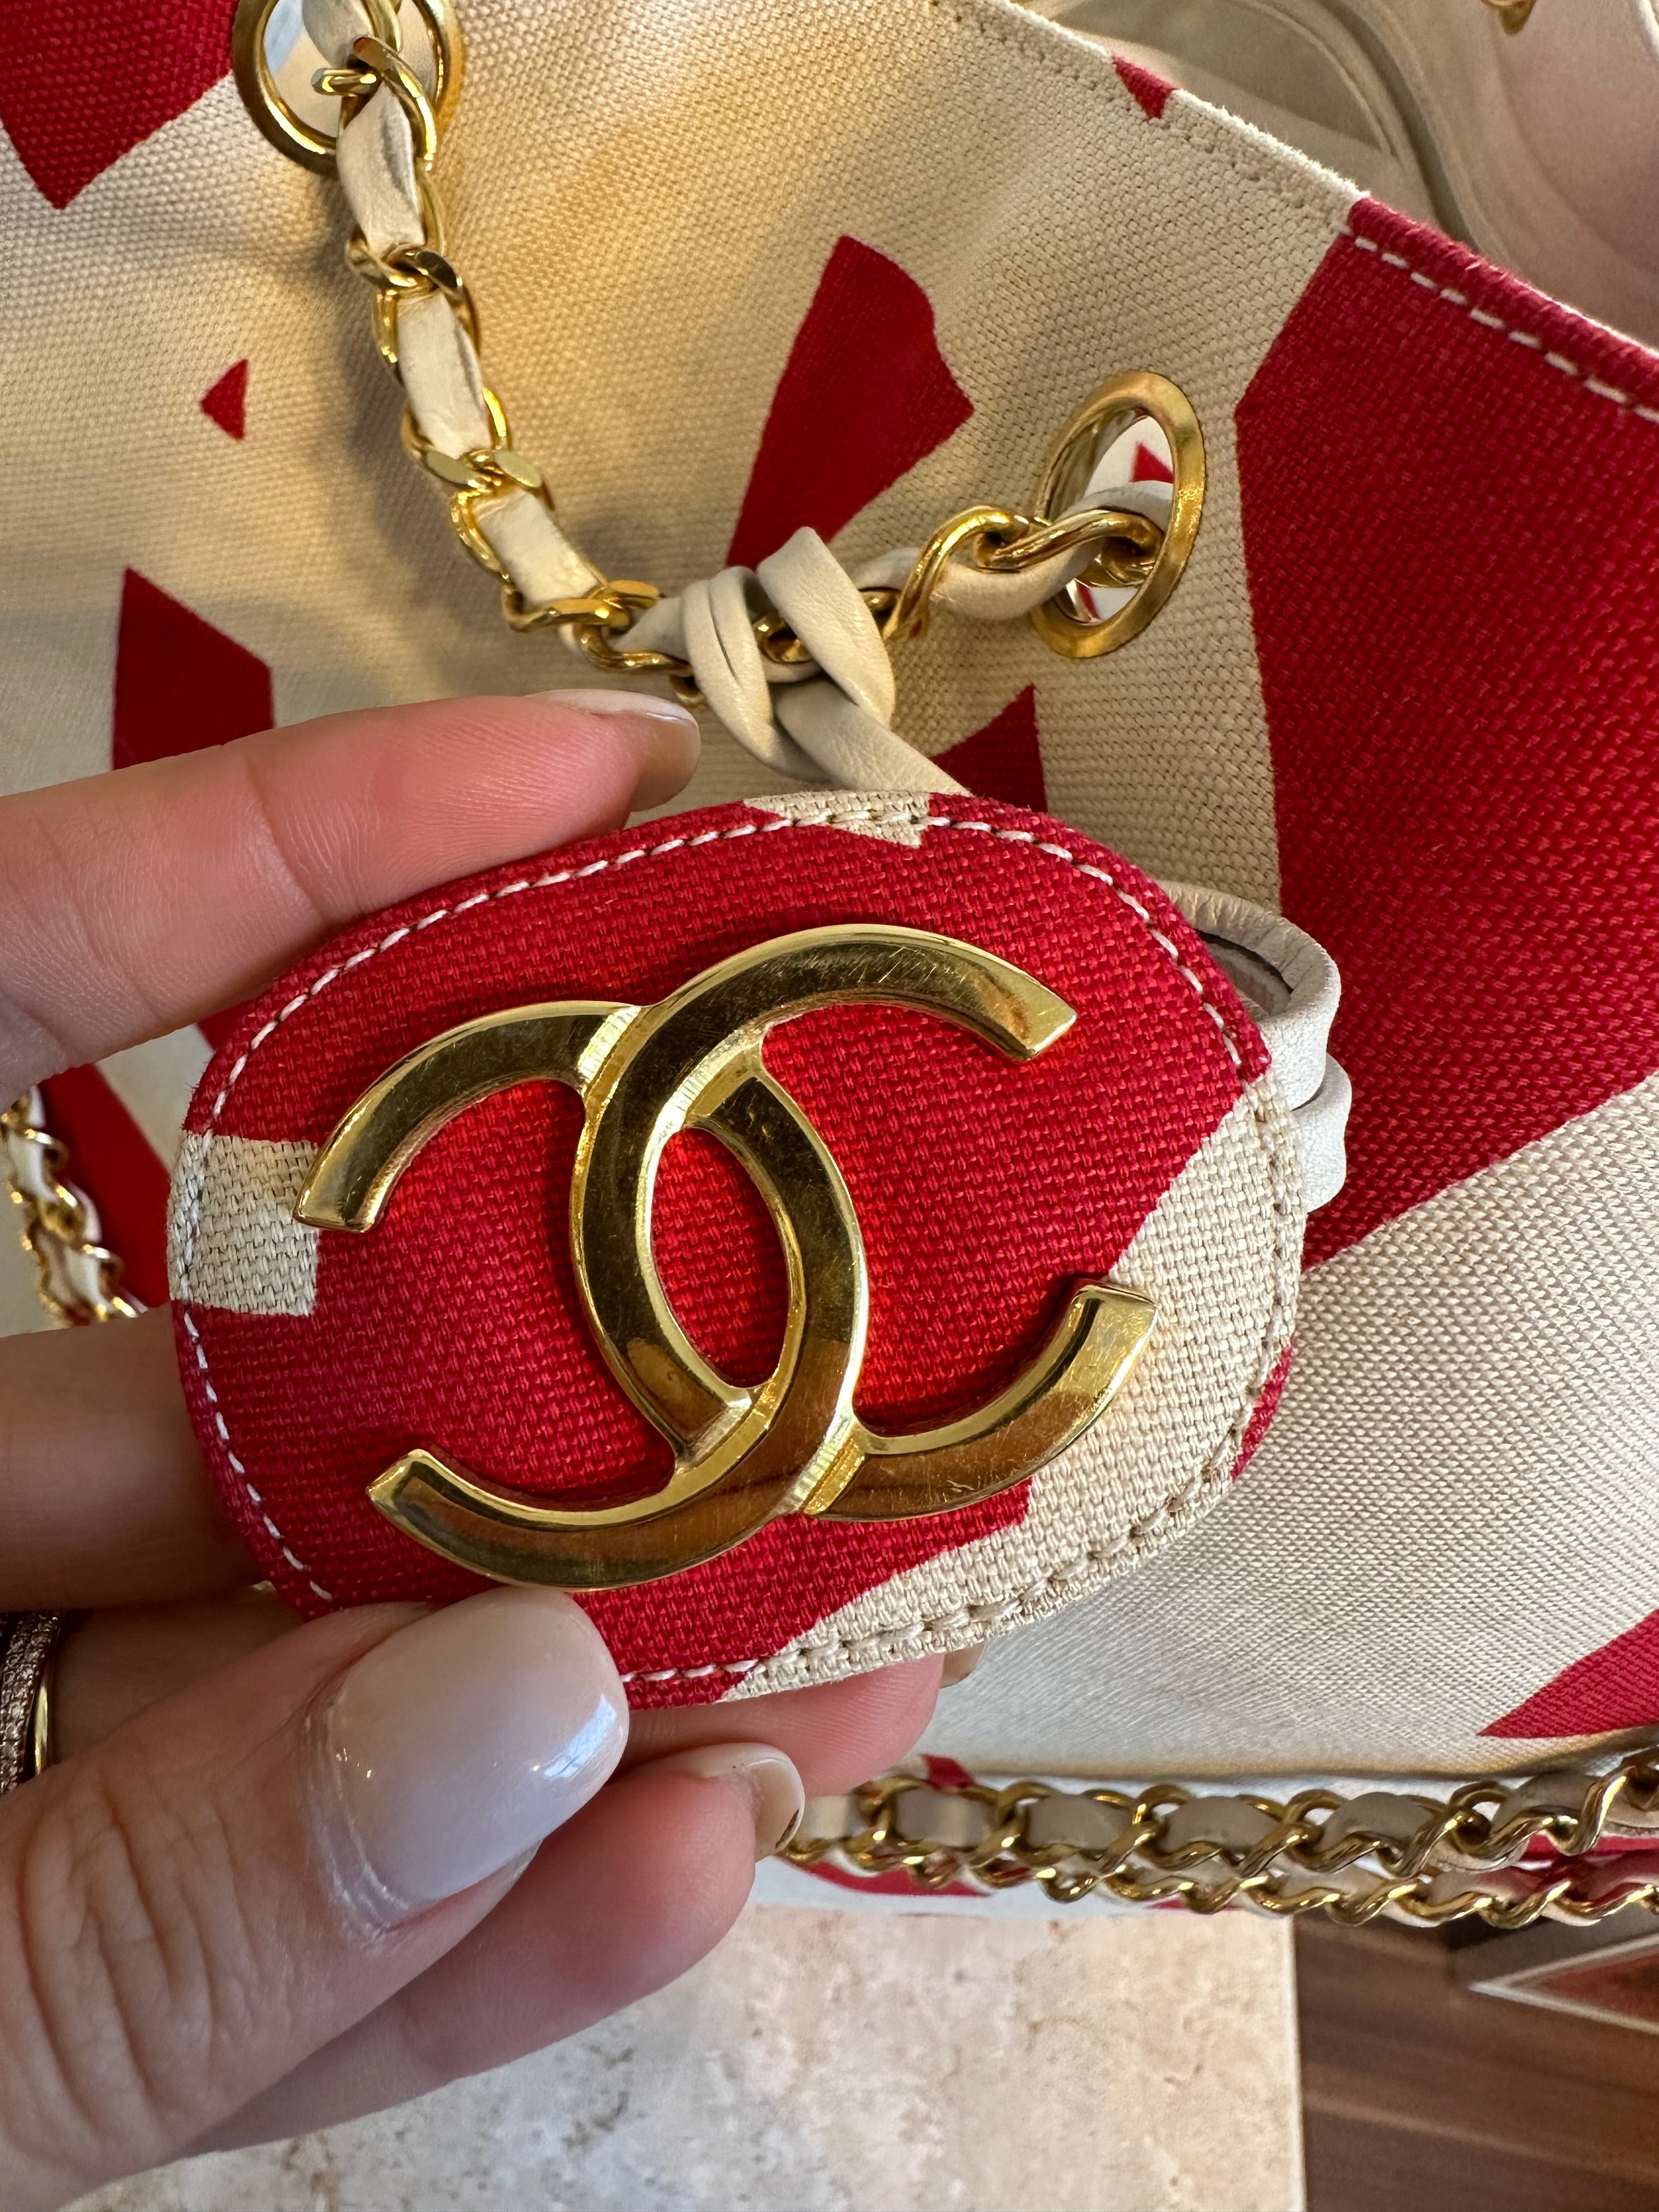 Pre-Owned CHANEL Vintage Red and White Canvas Beach Bag – Valamode